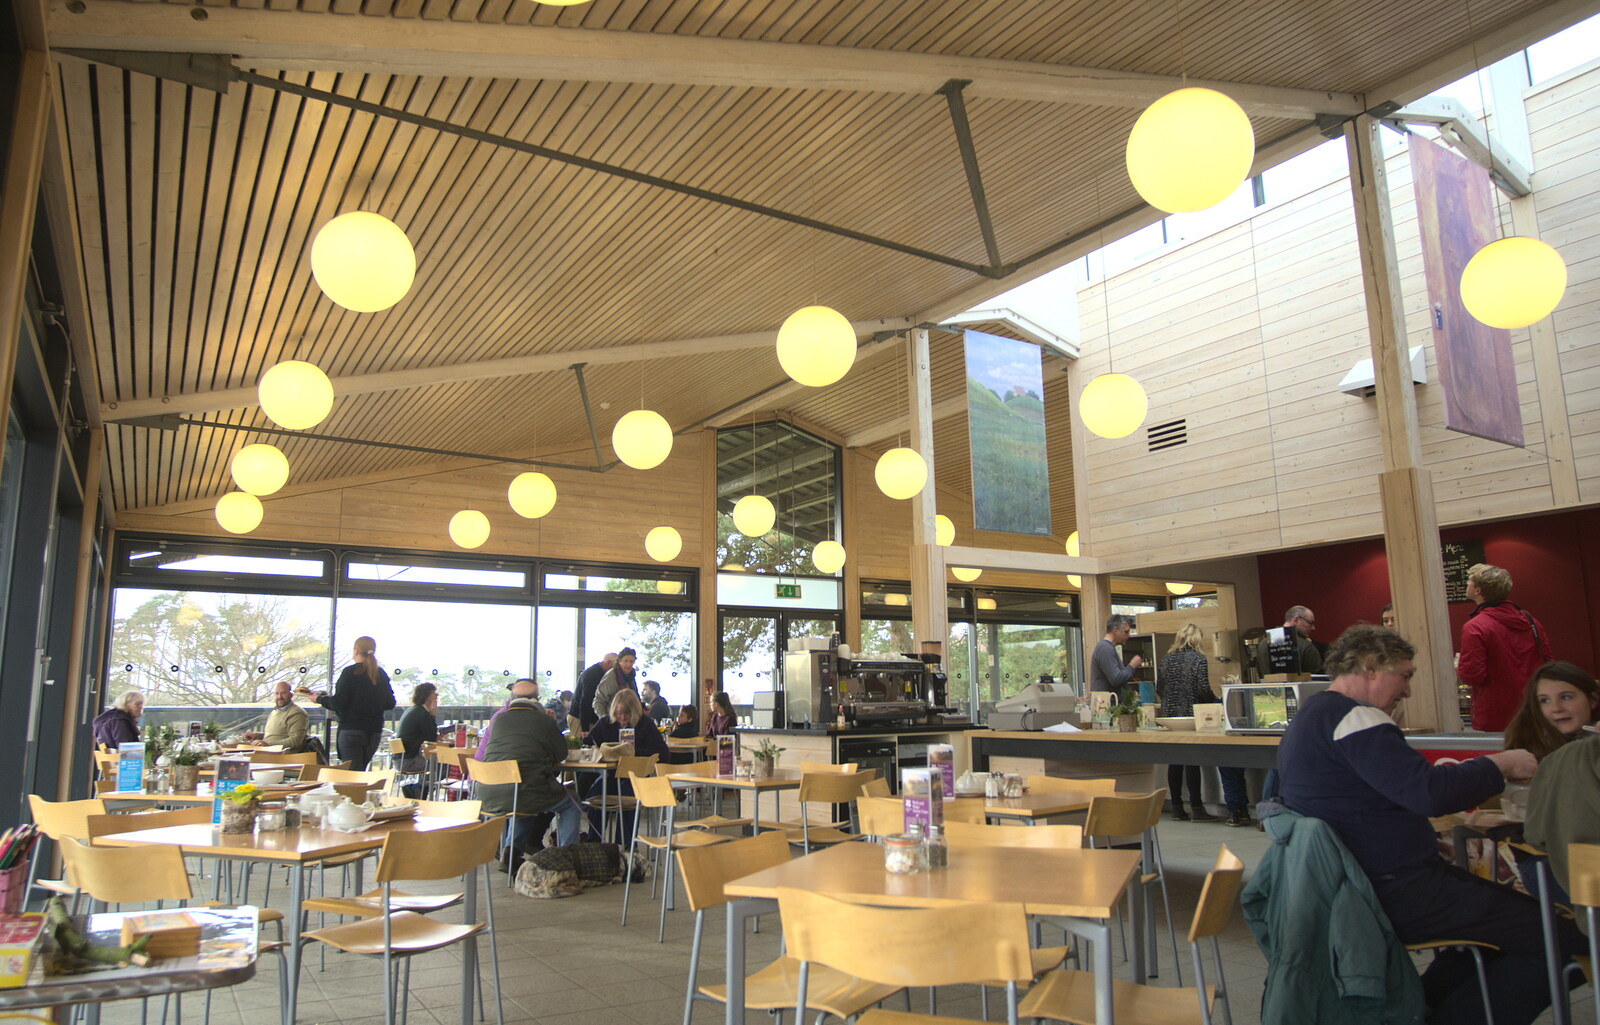 The impressive National Trust café from A Trip to Sutton Hoo, Woodbridge, Suffolk - 29th January 2017